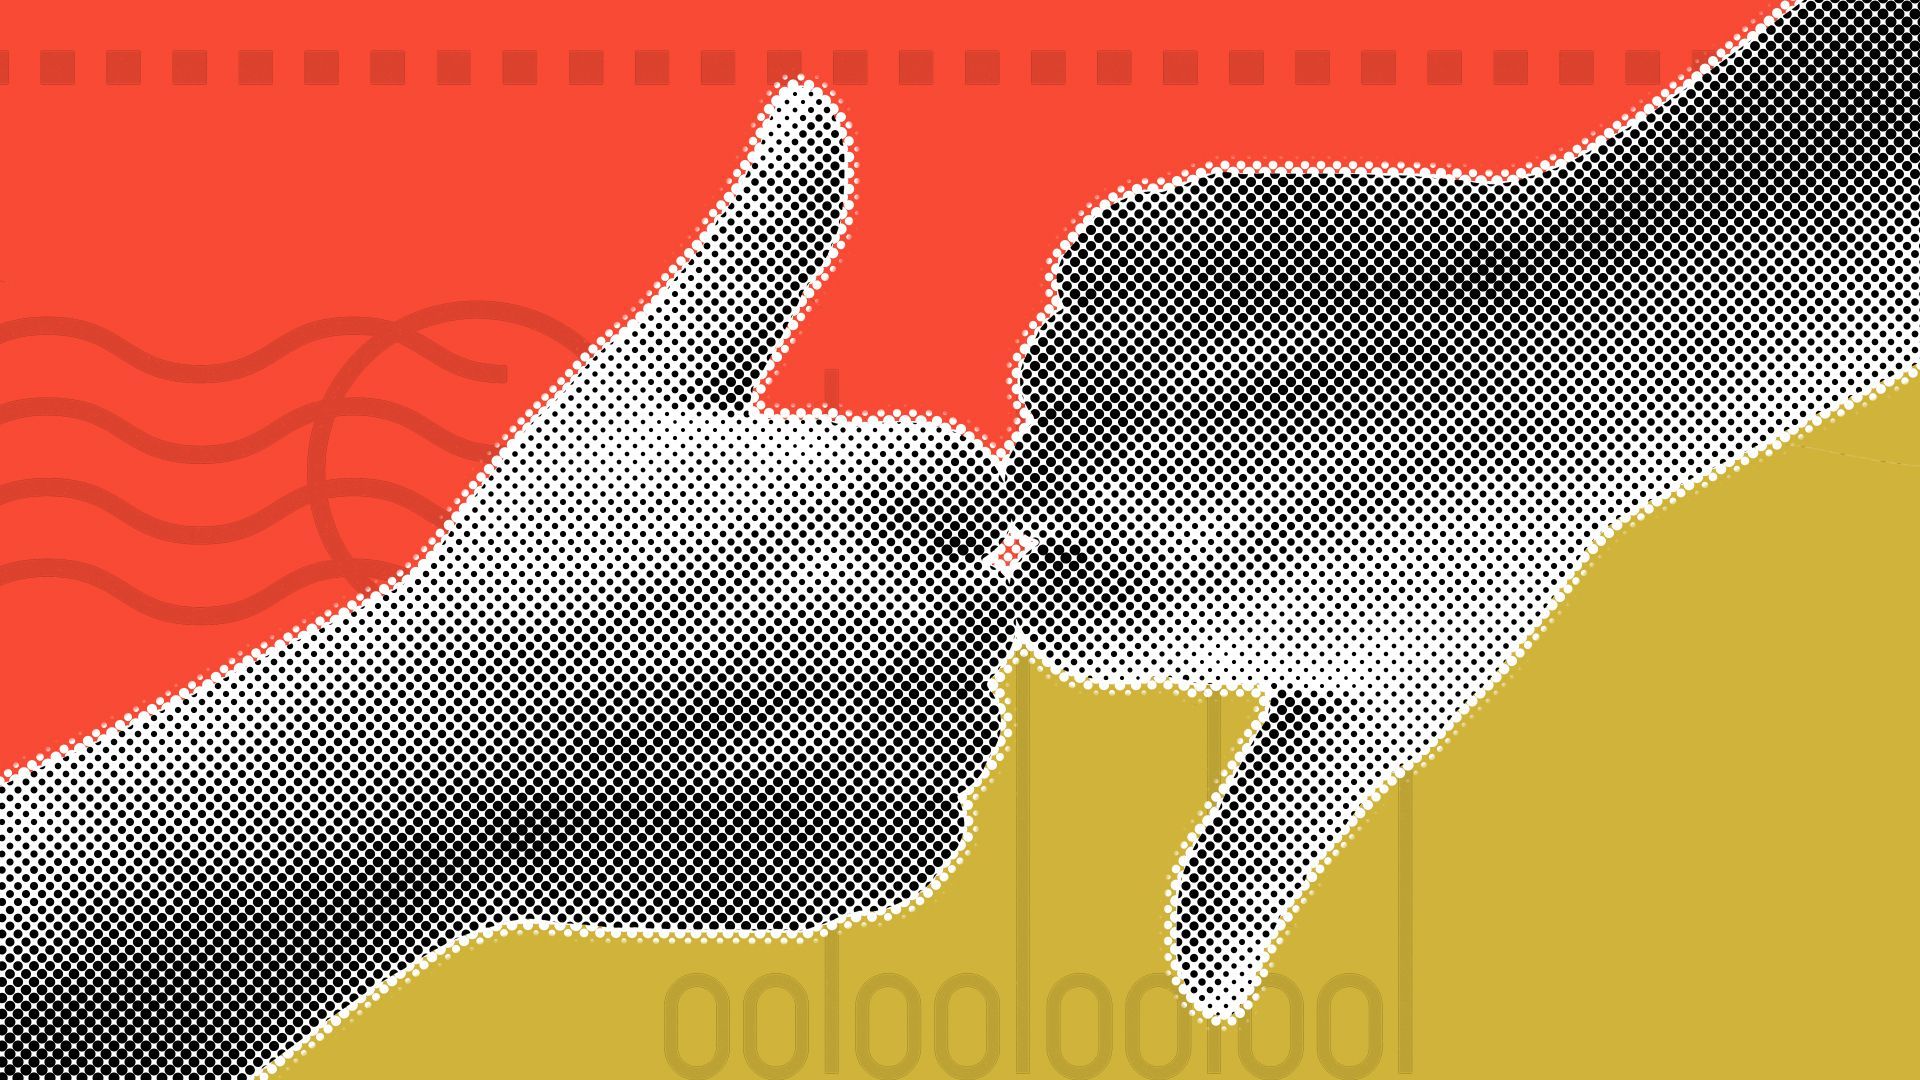 Illustration of a thumbs up and a thumbs down with ballot elements in the background.